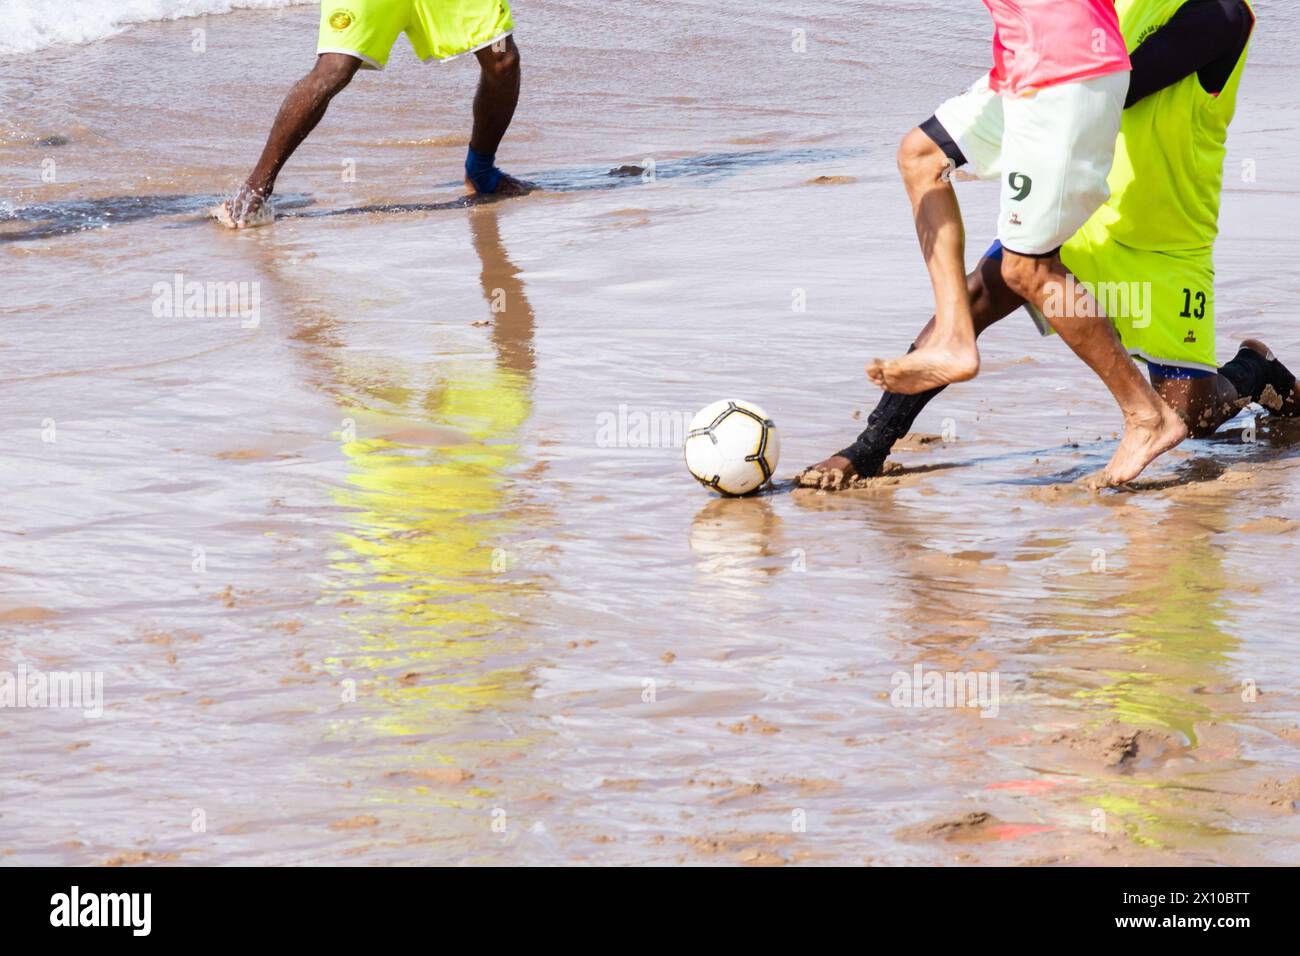 Salvador, Bahia, Brazil - September 15, 2019: Beach soccer players are seen playing on the beach in the city of Salvador, Bahia. Stock Photo